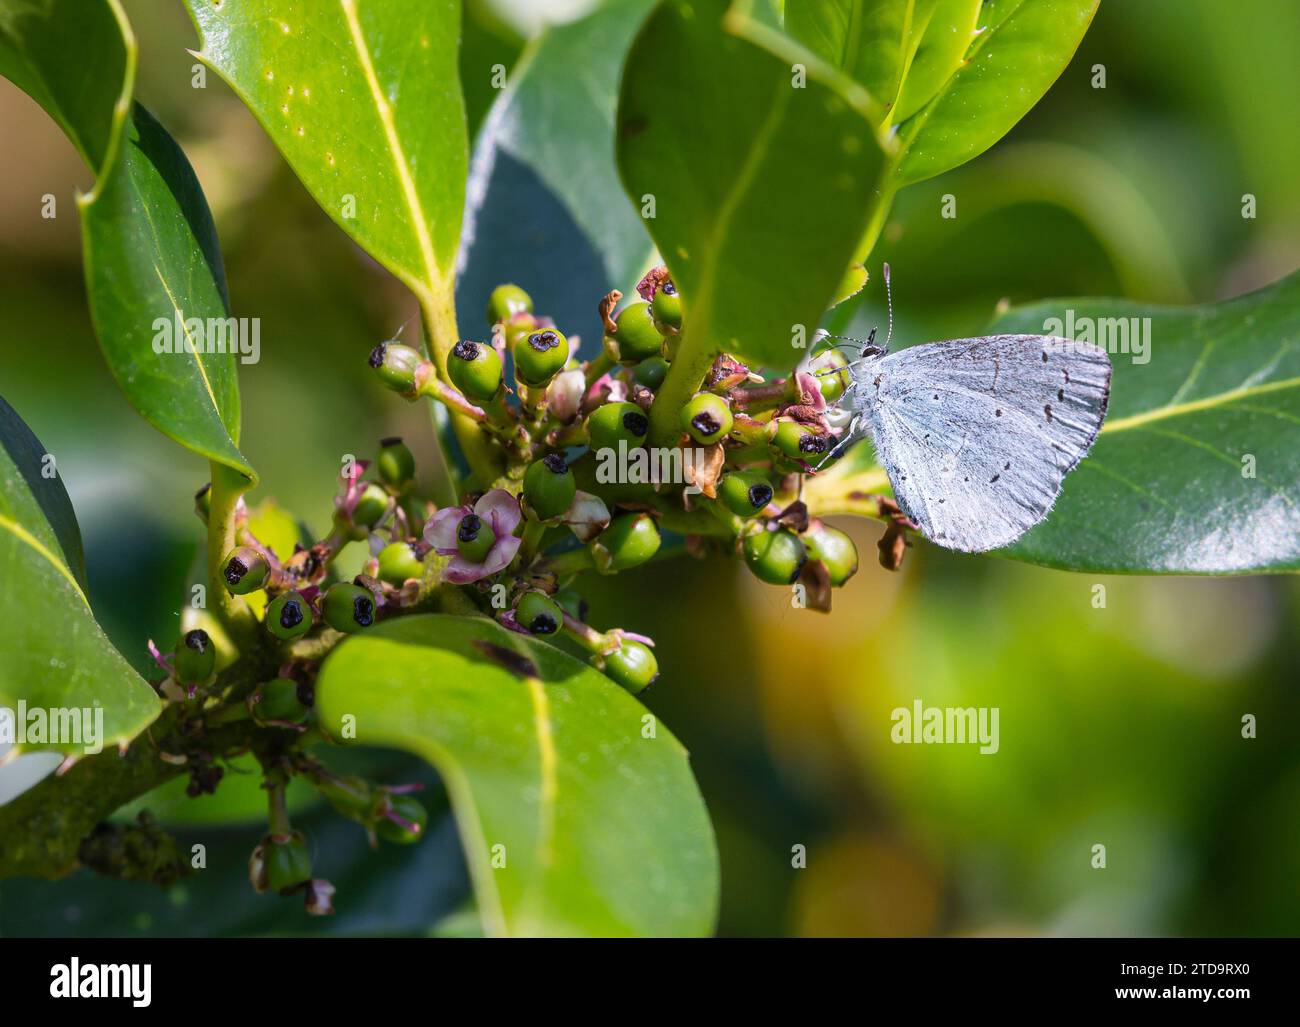 Holly blue butterfly  Celastrina argiolus, feeding on holly flowers in a garden, May Stock Photo